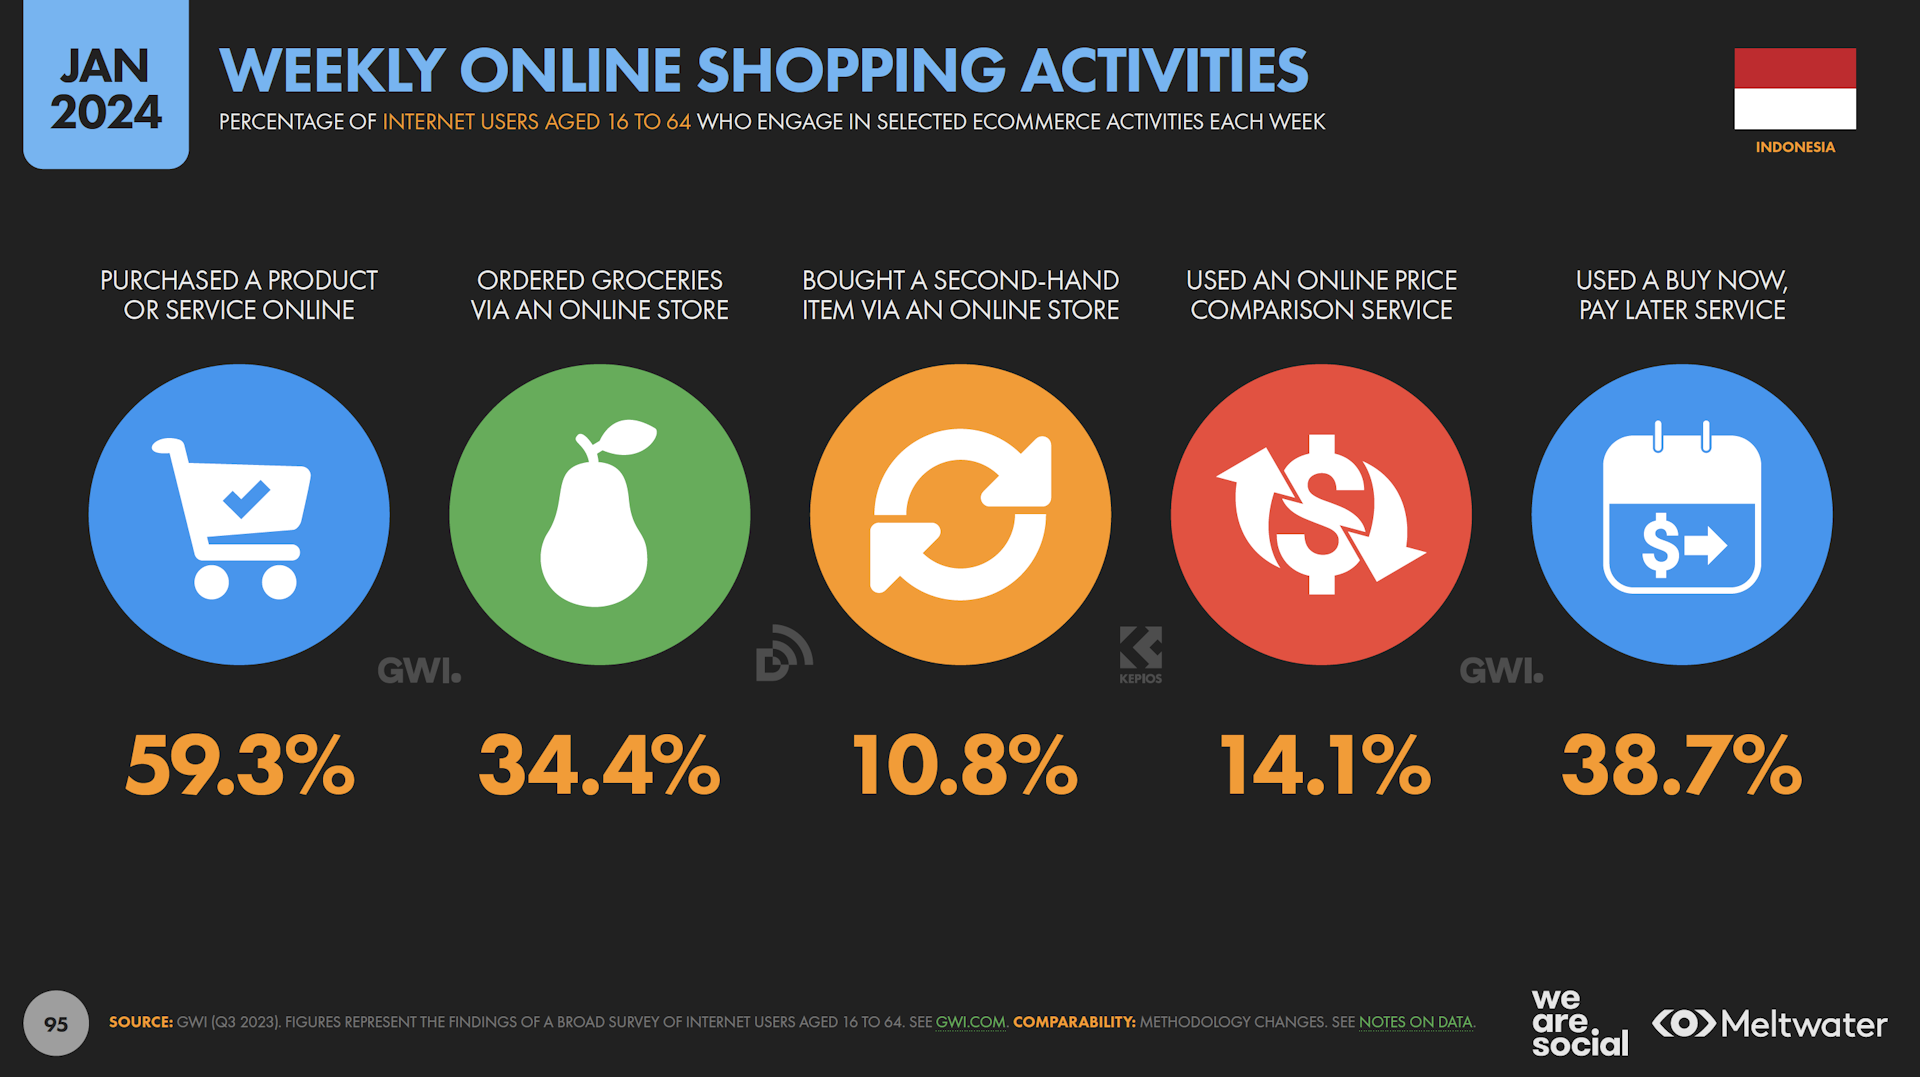 Weekly online shopping activities based on Global Digital Report 2024 for Indonesia